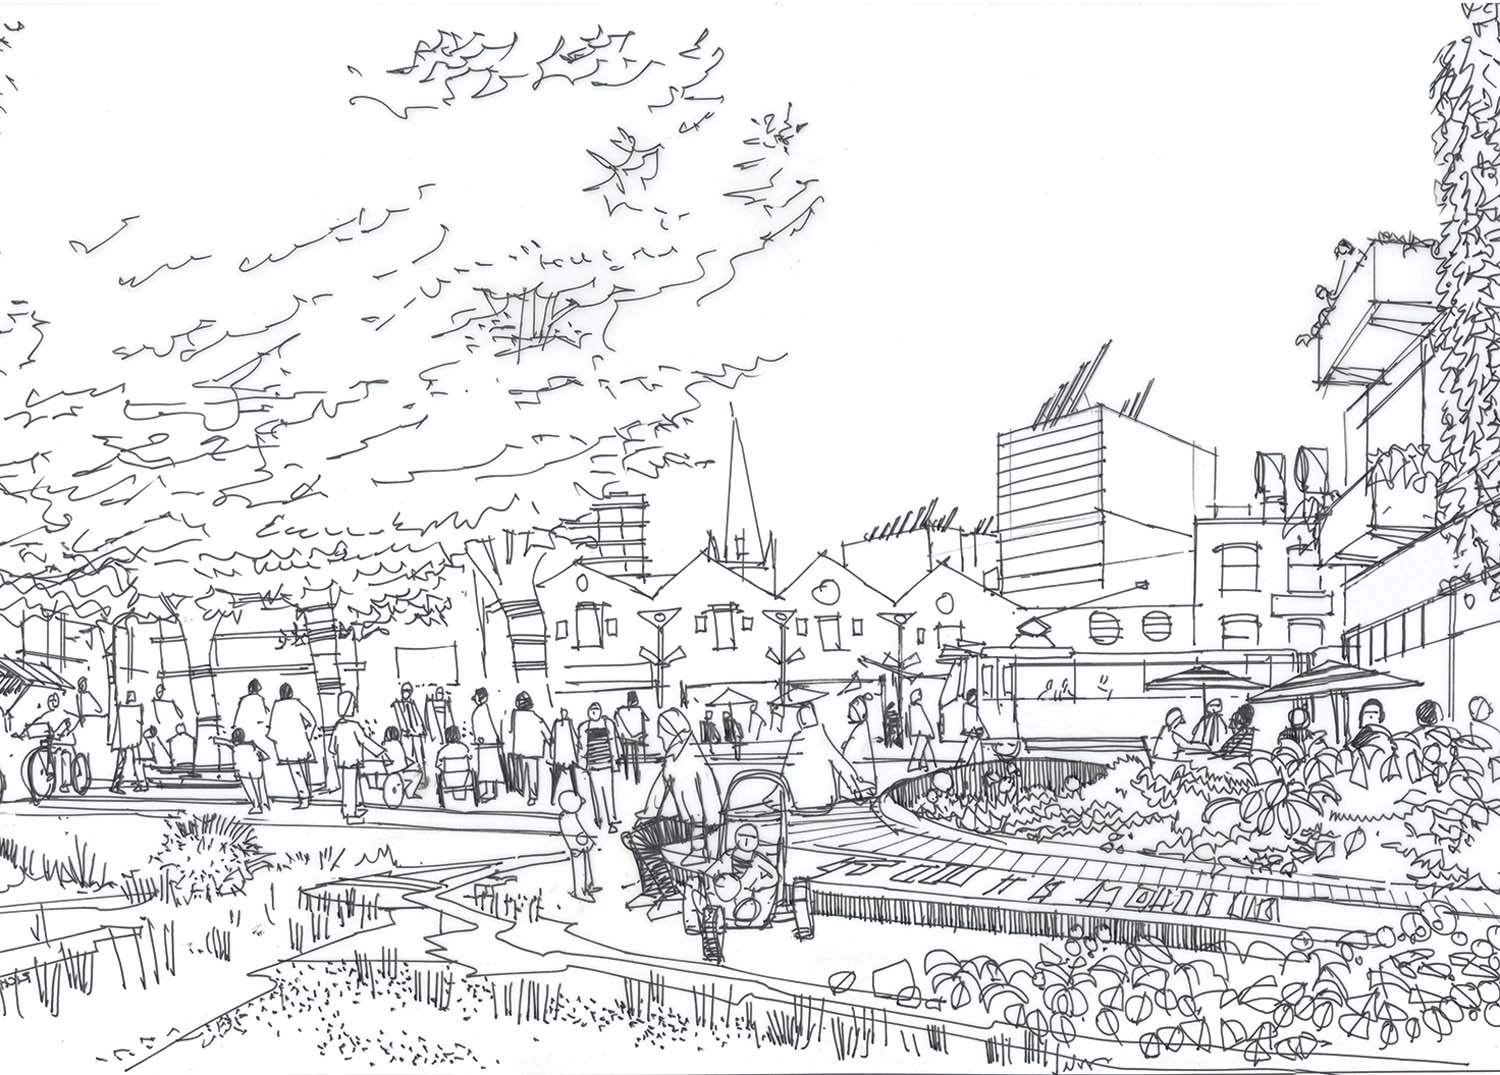 An architectural sketch of green space in a town centre with people sitting and walking in the area.